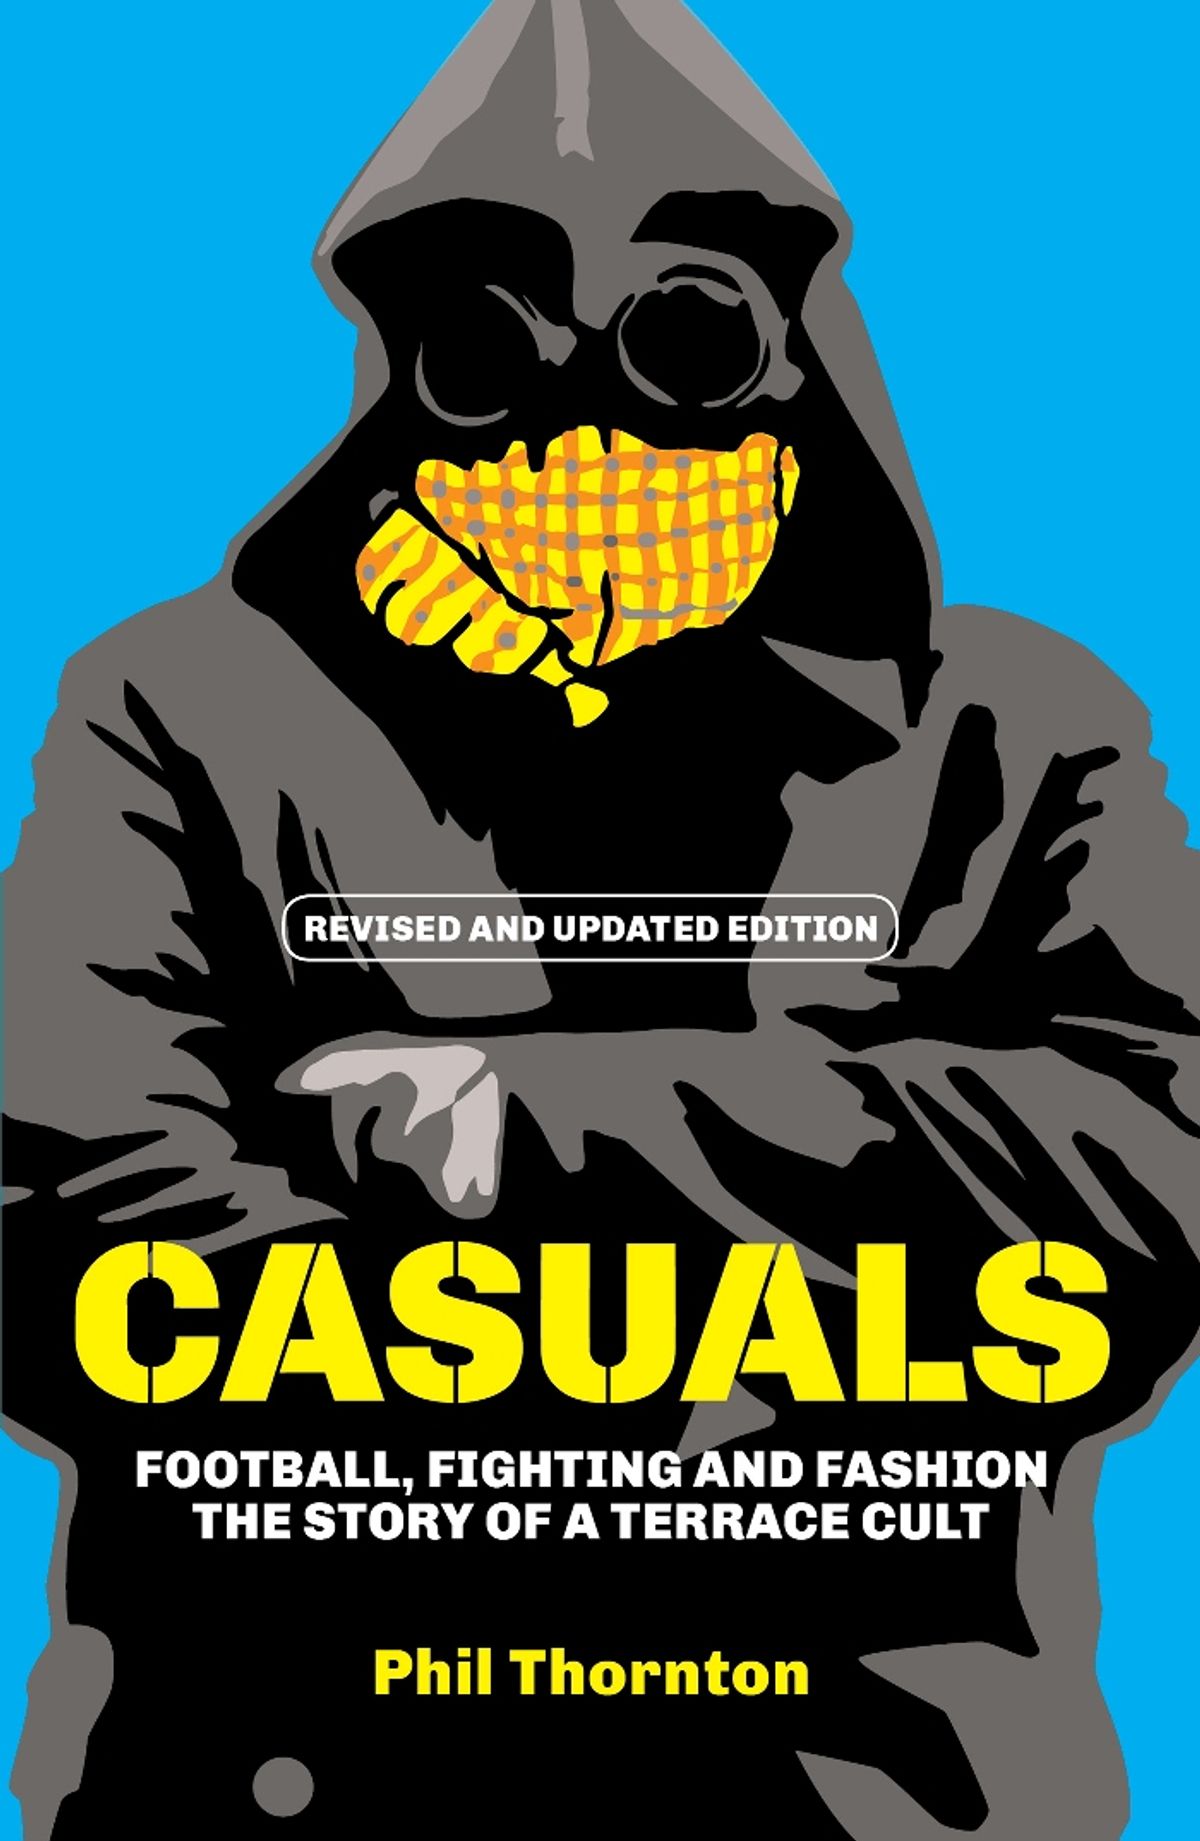 Casuals: Football, Fighting and Fashion: The Story of a Terrace Cult